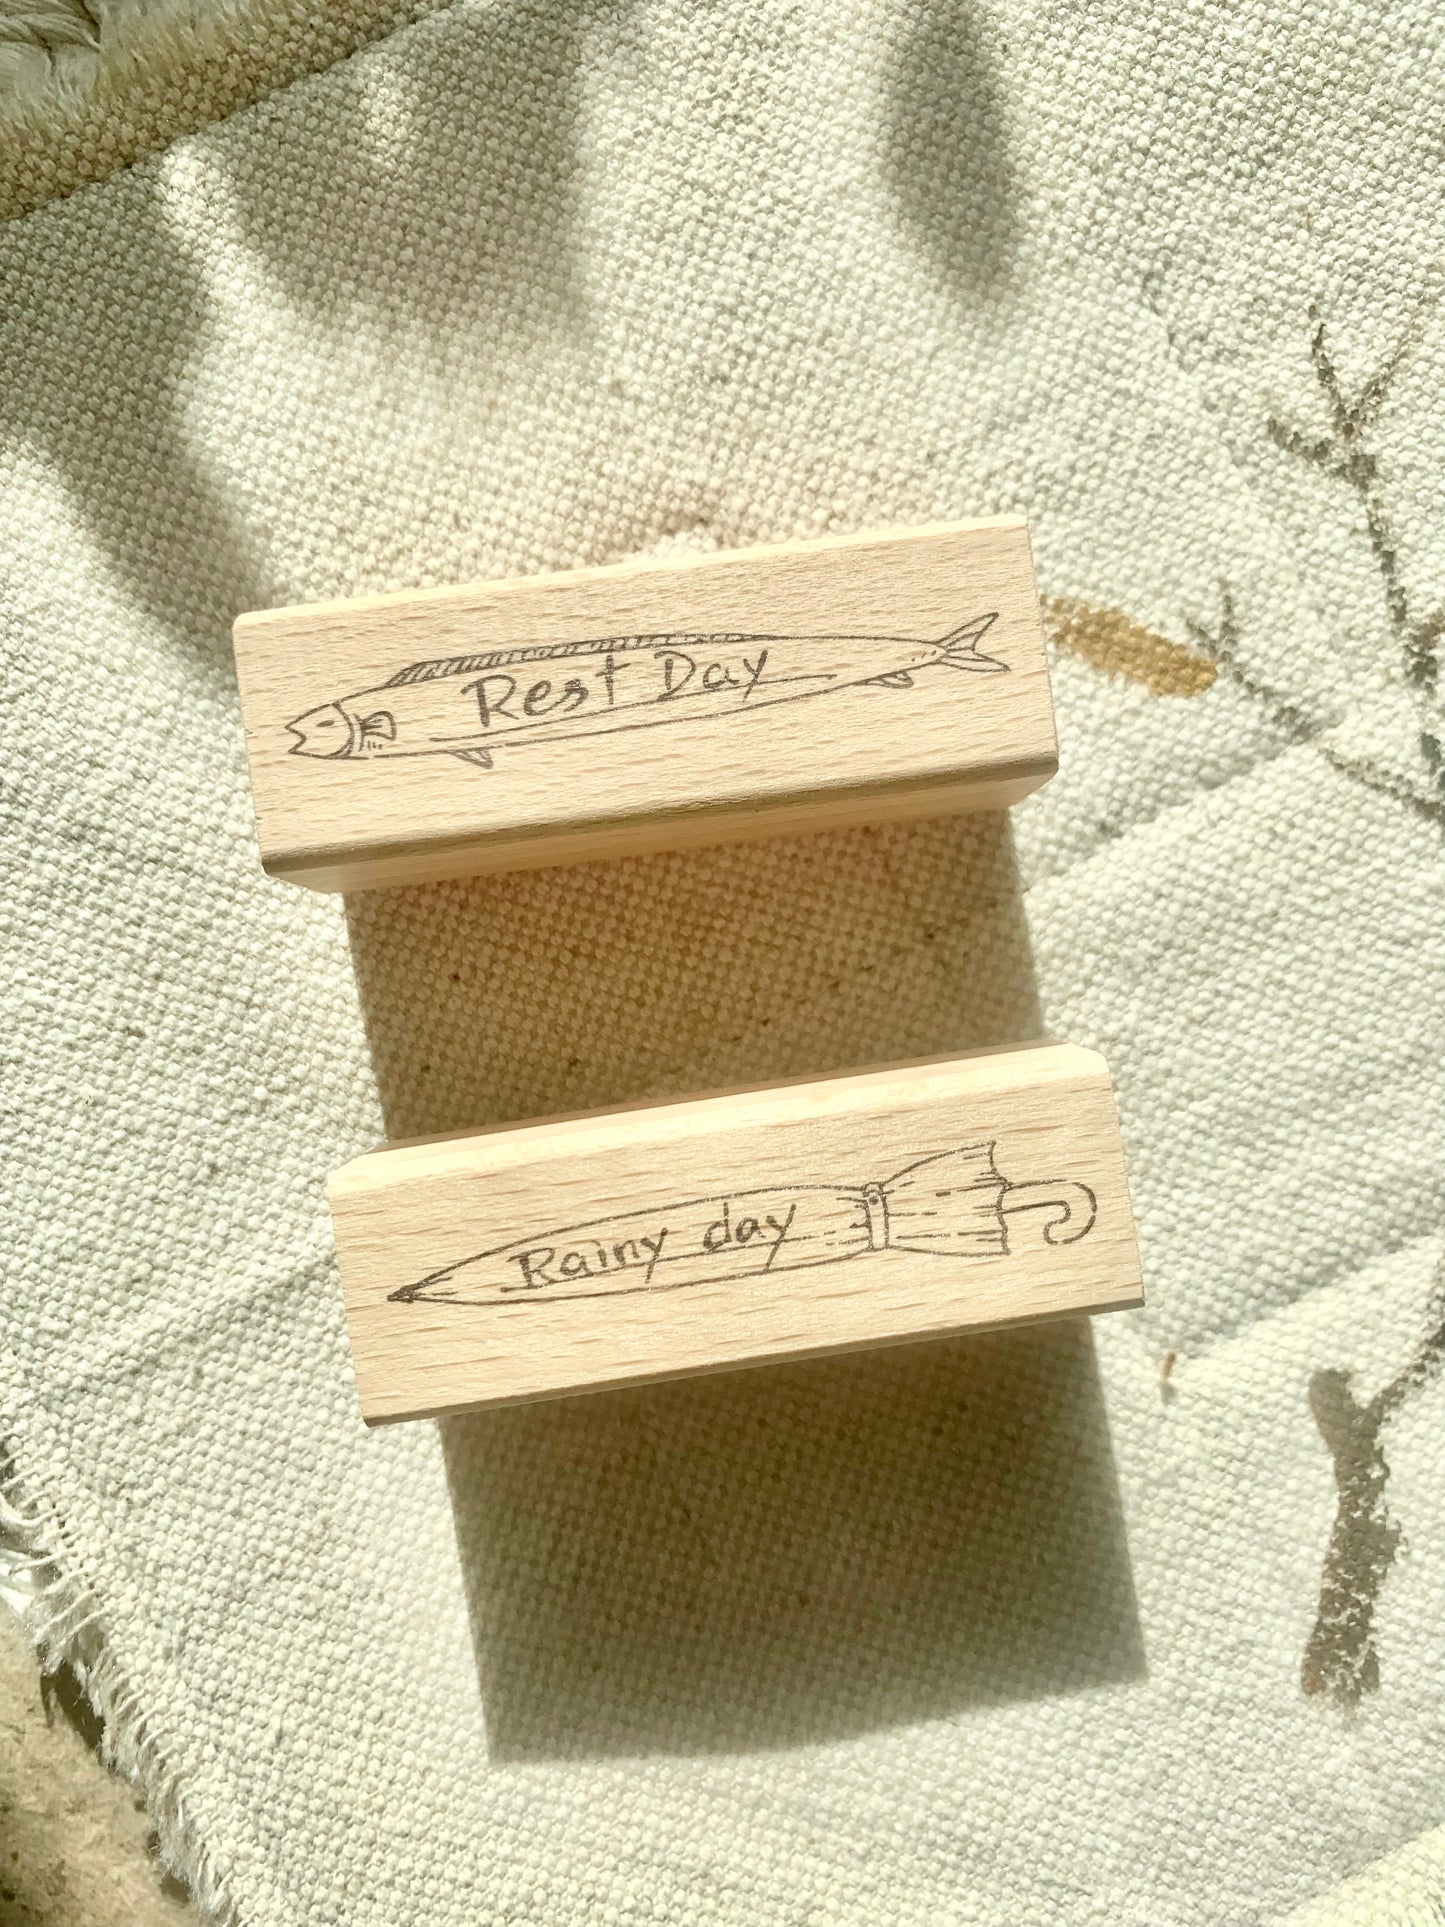 2 Pu Studio - Small Title | Rubber Stamps